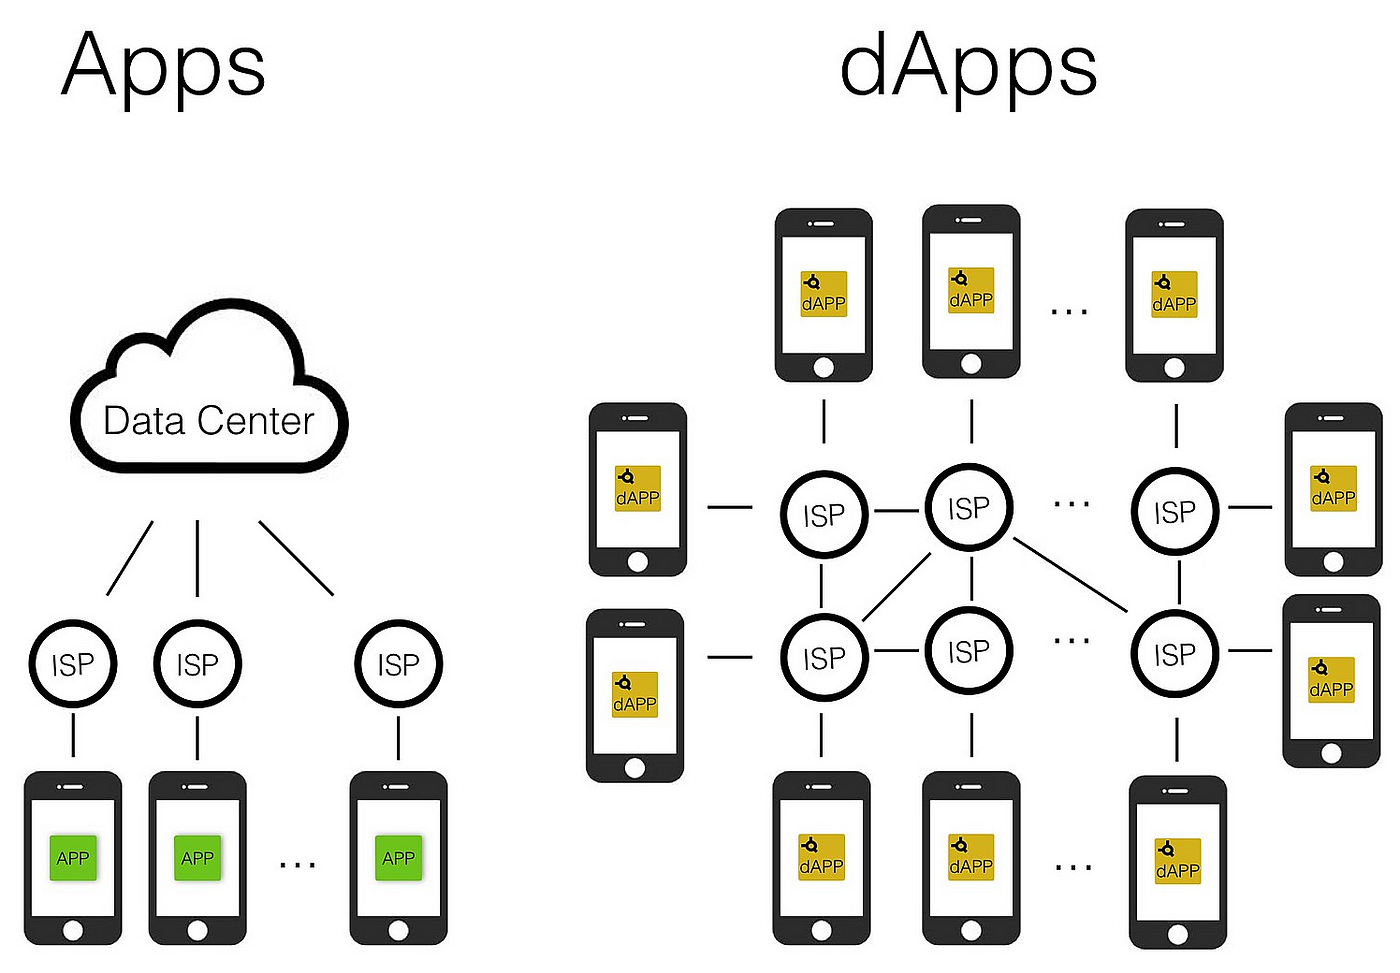 Decentralized Applications (dApps): Definition, Uses, Pros and Cons